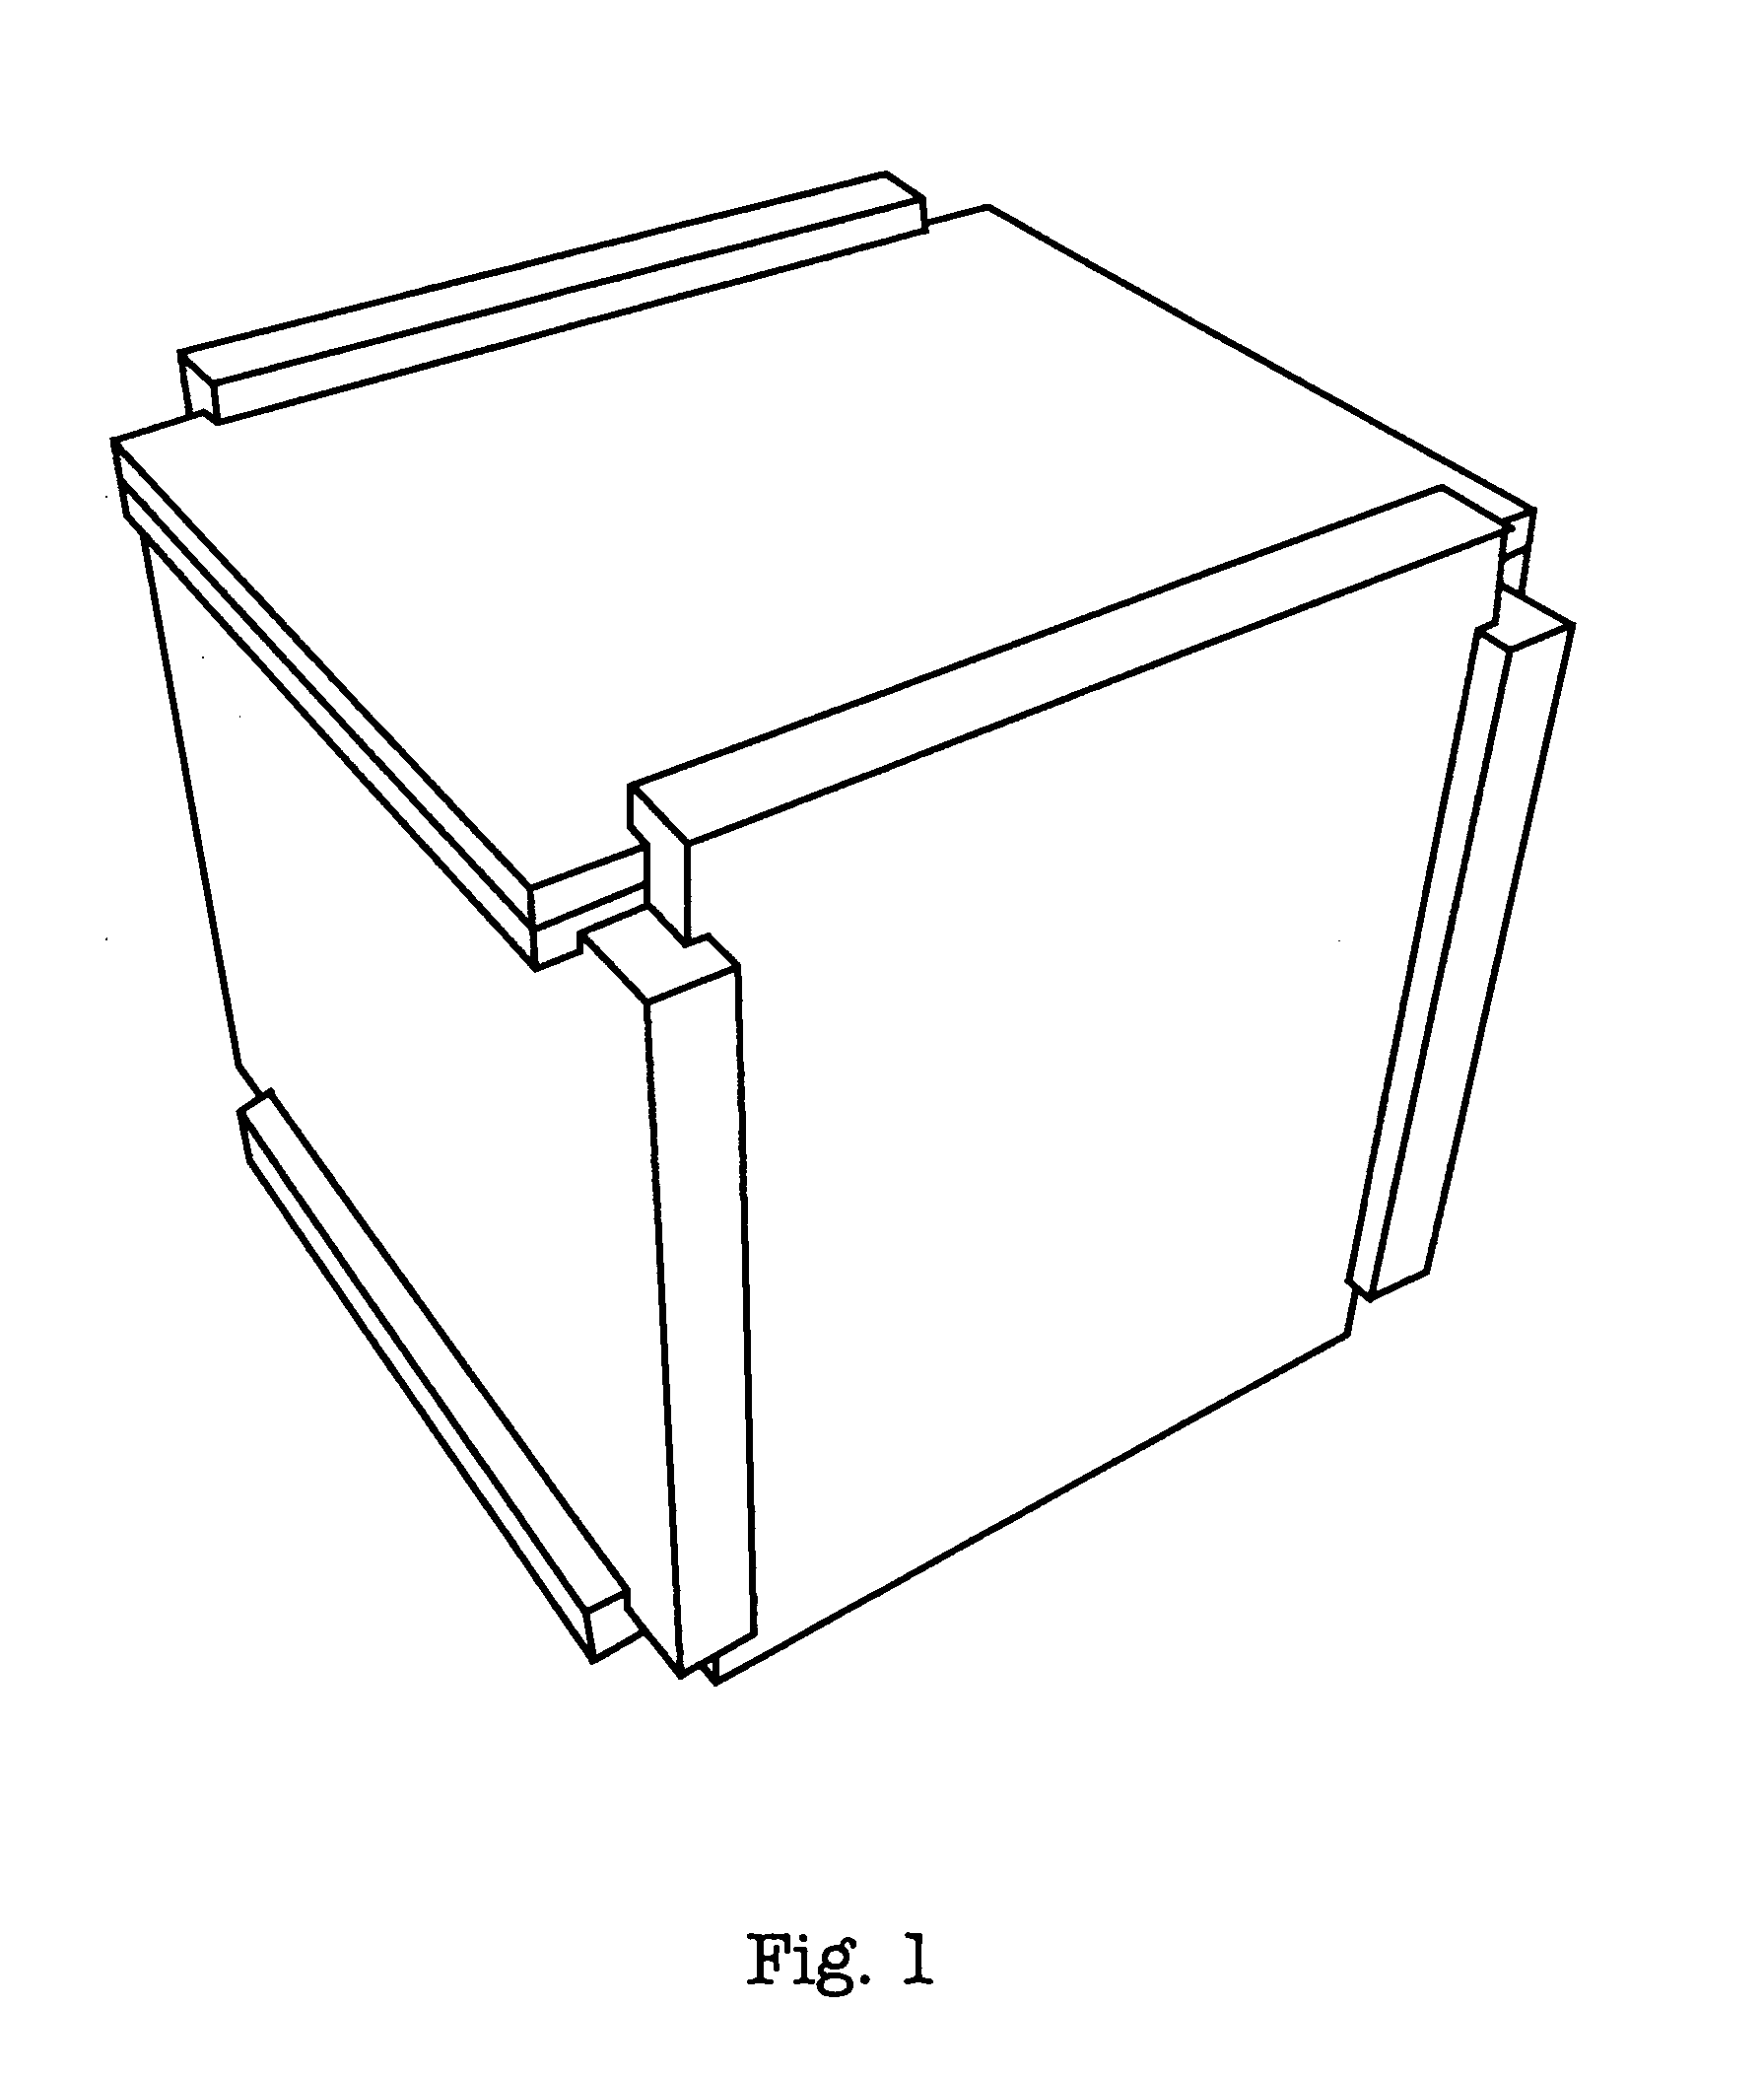 Joint building system for box structures